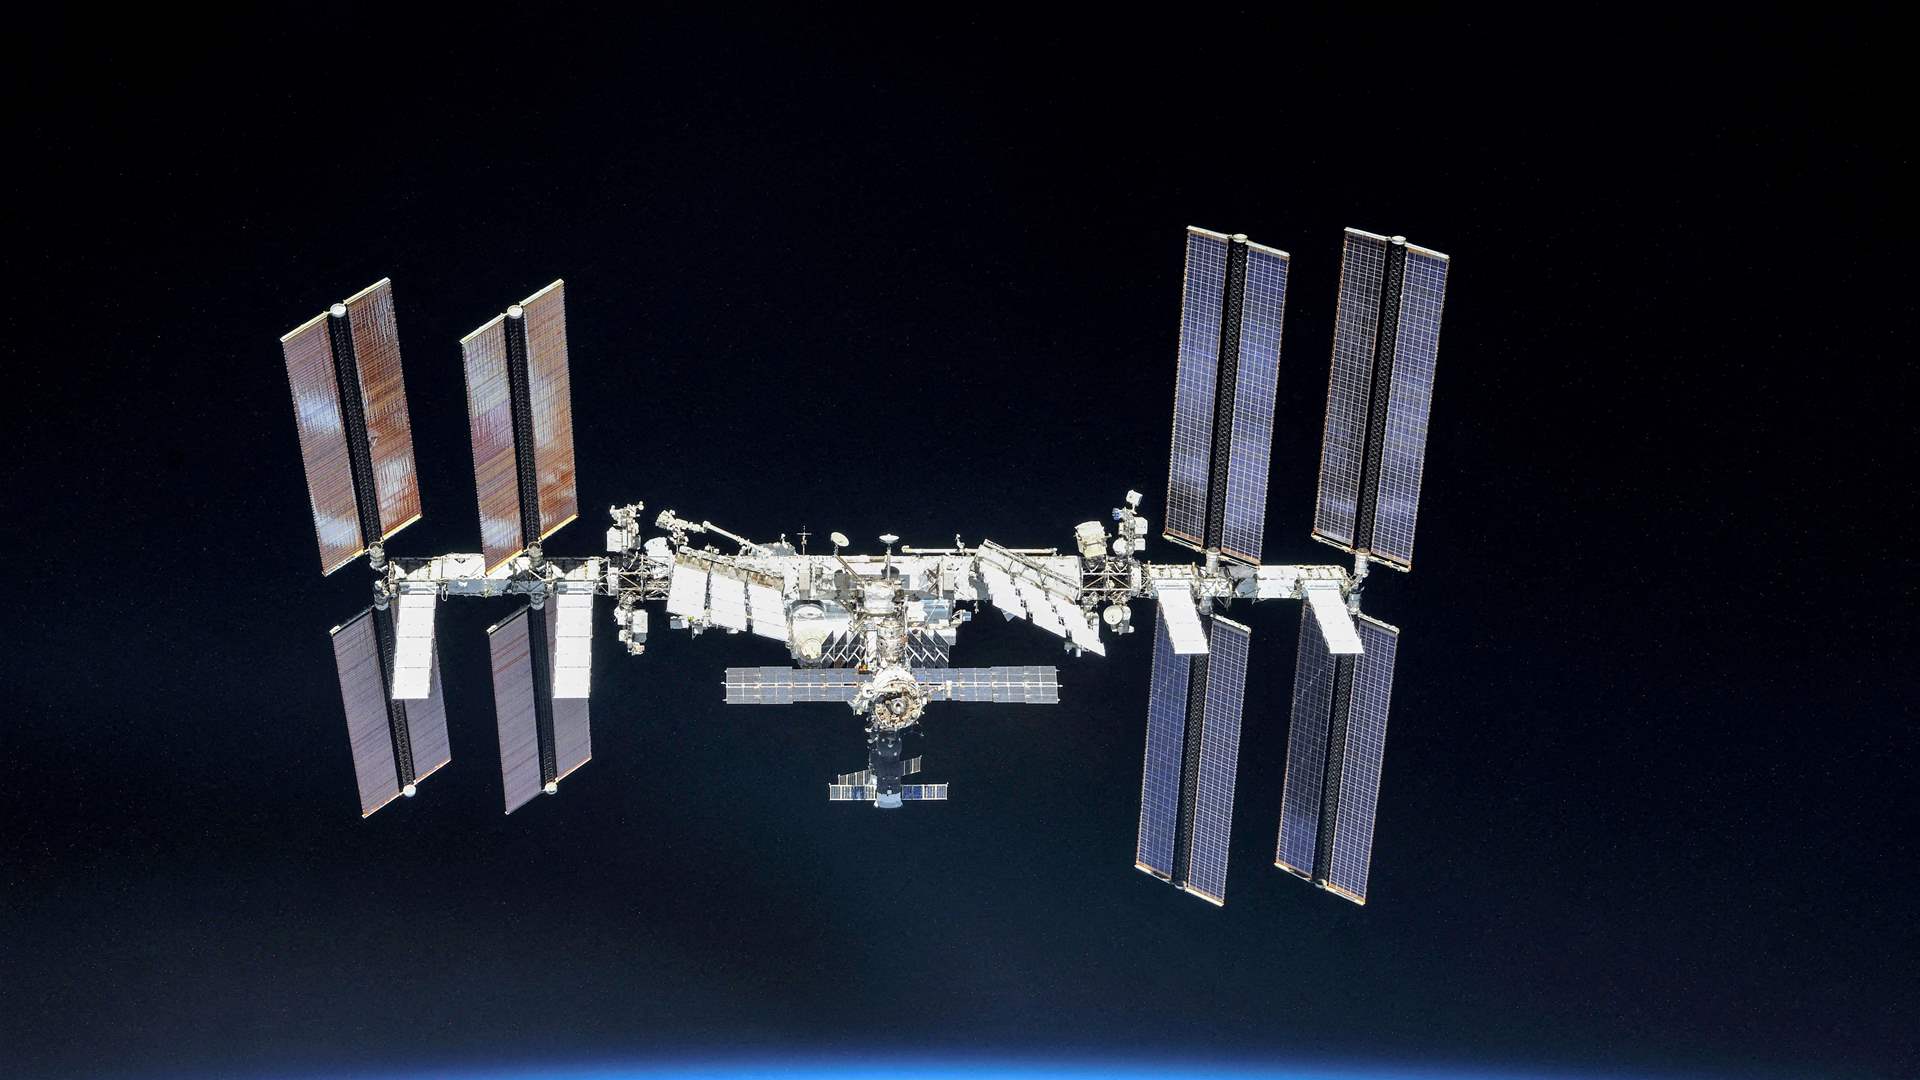 Russia, NASA agree to continue joint ISS flights until 2025